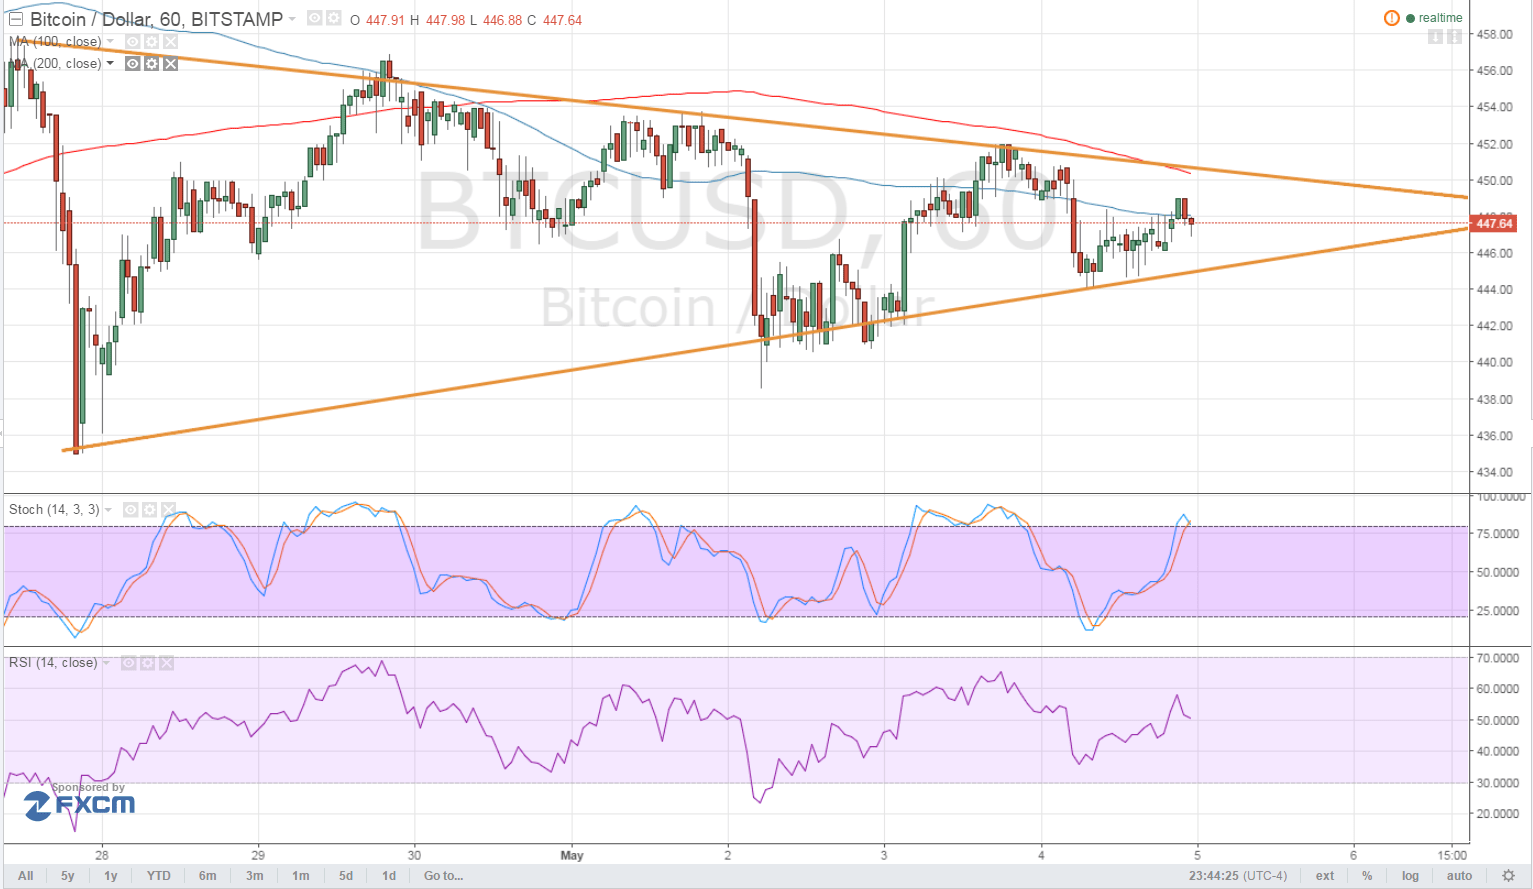 Bitcoin Price Technical Analysis for 05/05/2016 - Eyes on Triangle Resistance!